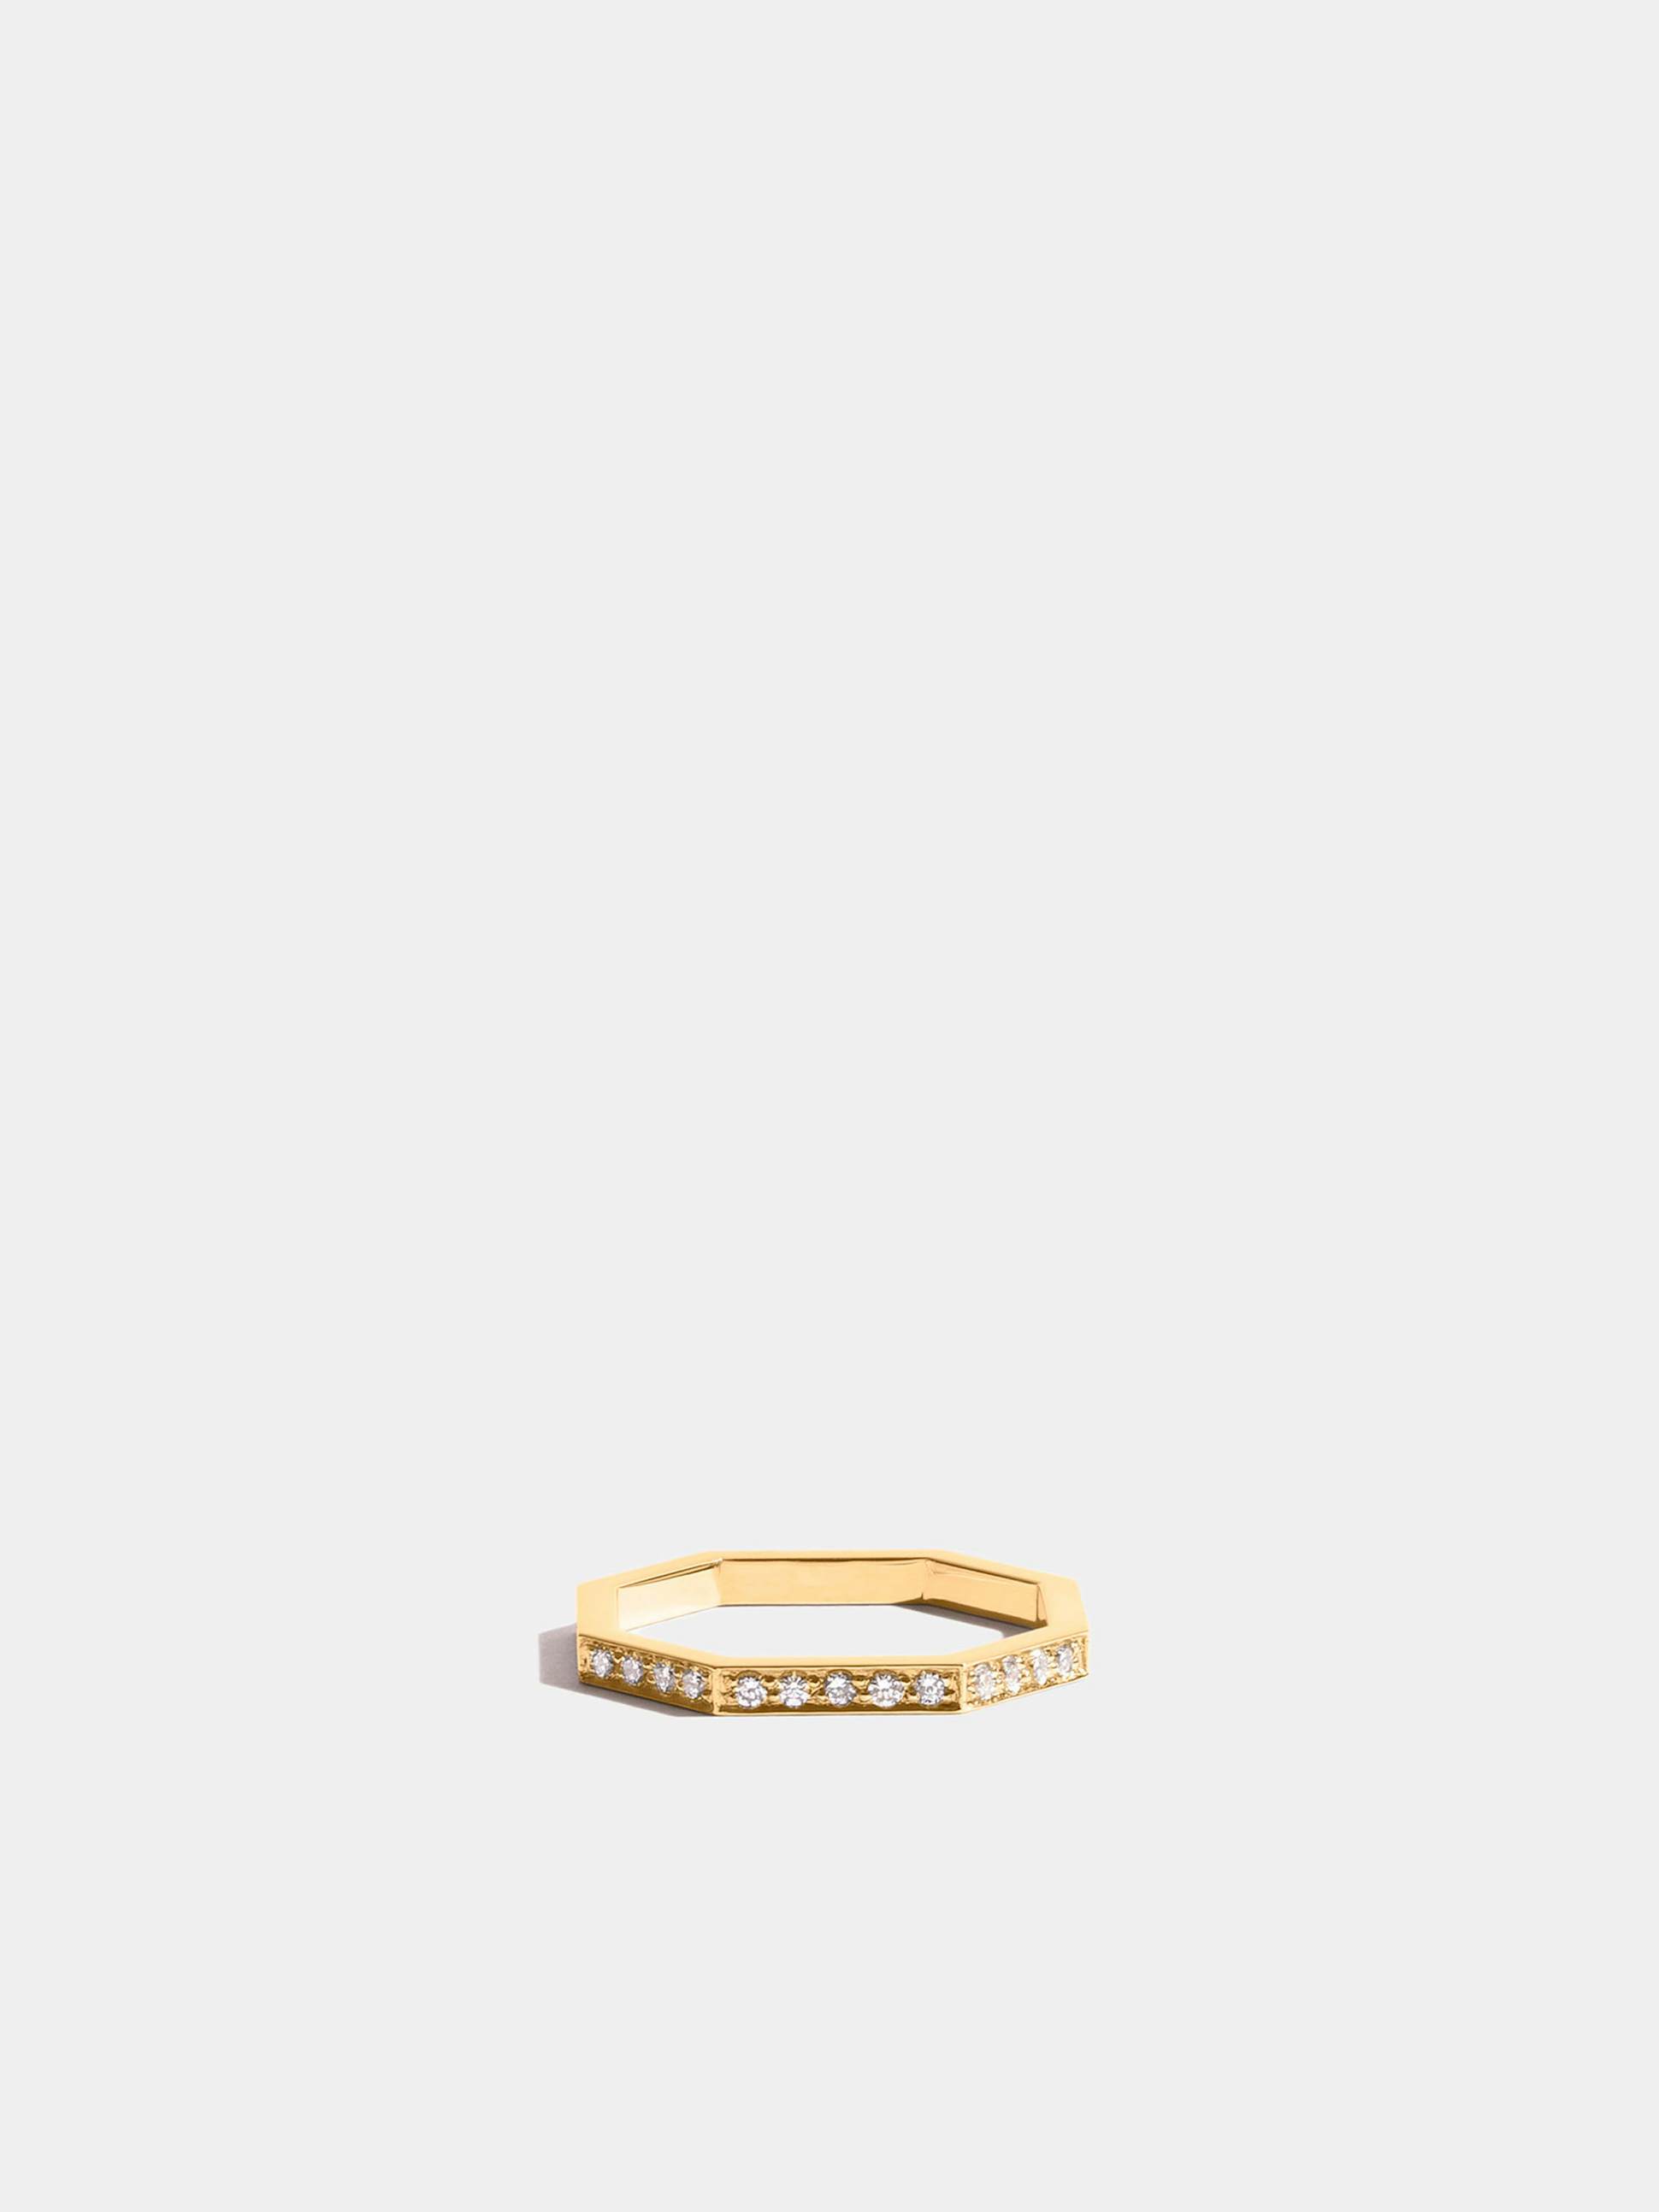 Octogone simple ring in 18k Fairmined ethical yellow gold and paved with lab-grown diamonds